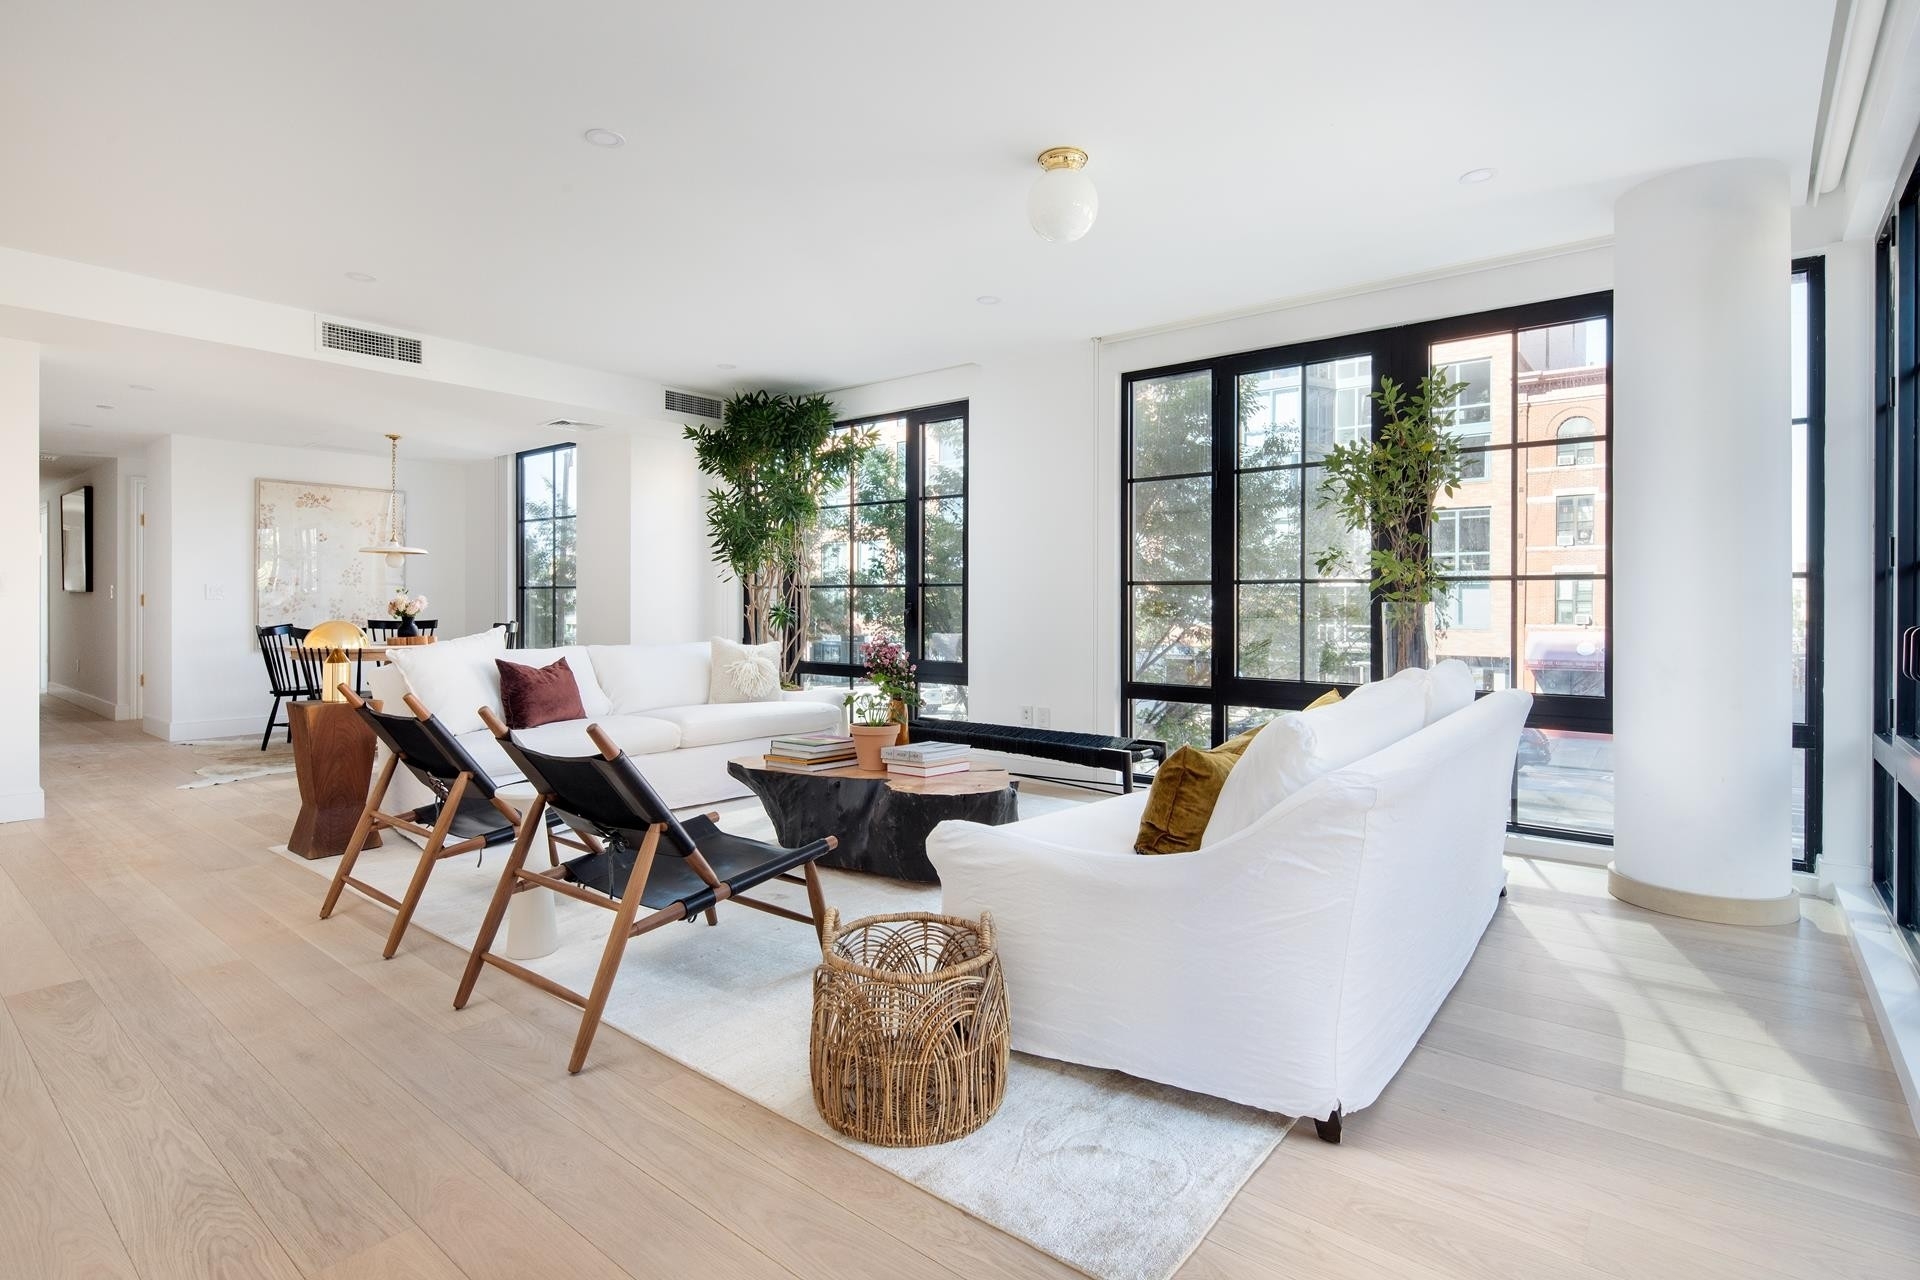 Condominium for Sale at The Butler Collecti, 137 4TH AVE, 5 Park Slope, Brooklyn, NY 11217